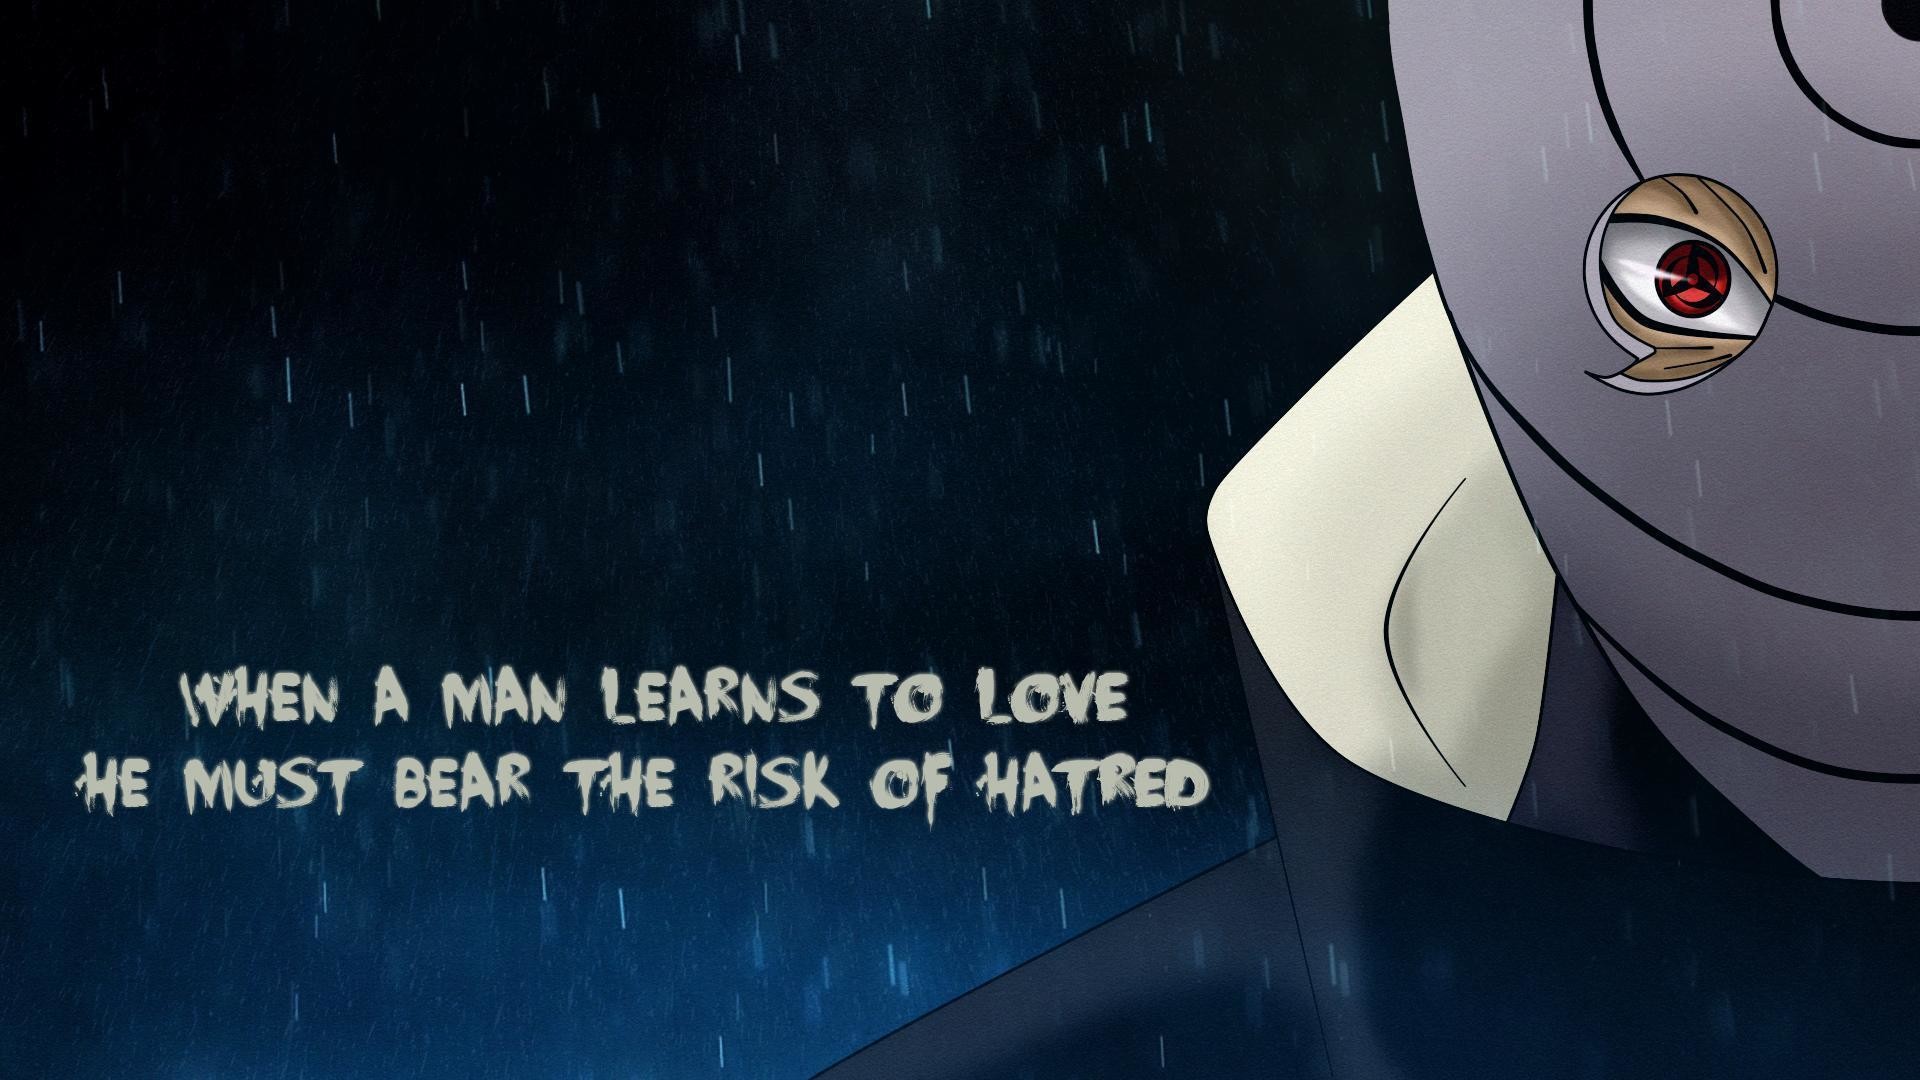 Shisui Uchiha Quotes posted by Ryan Sellers